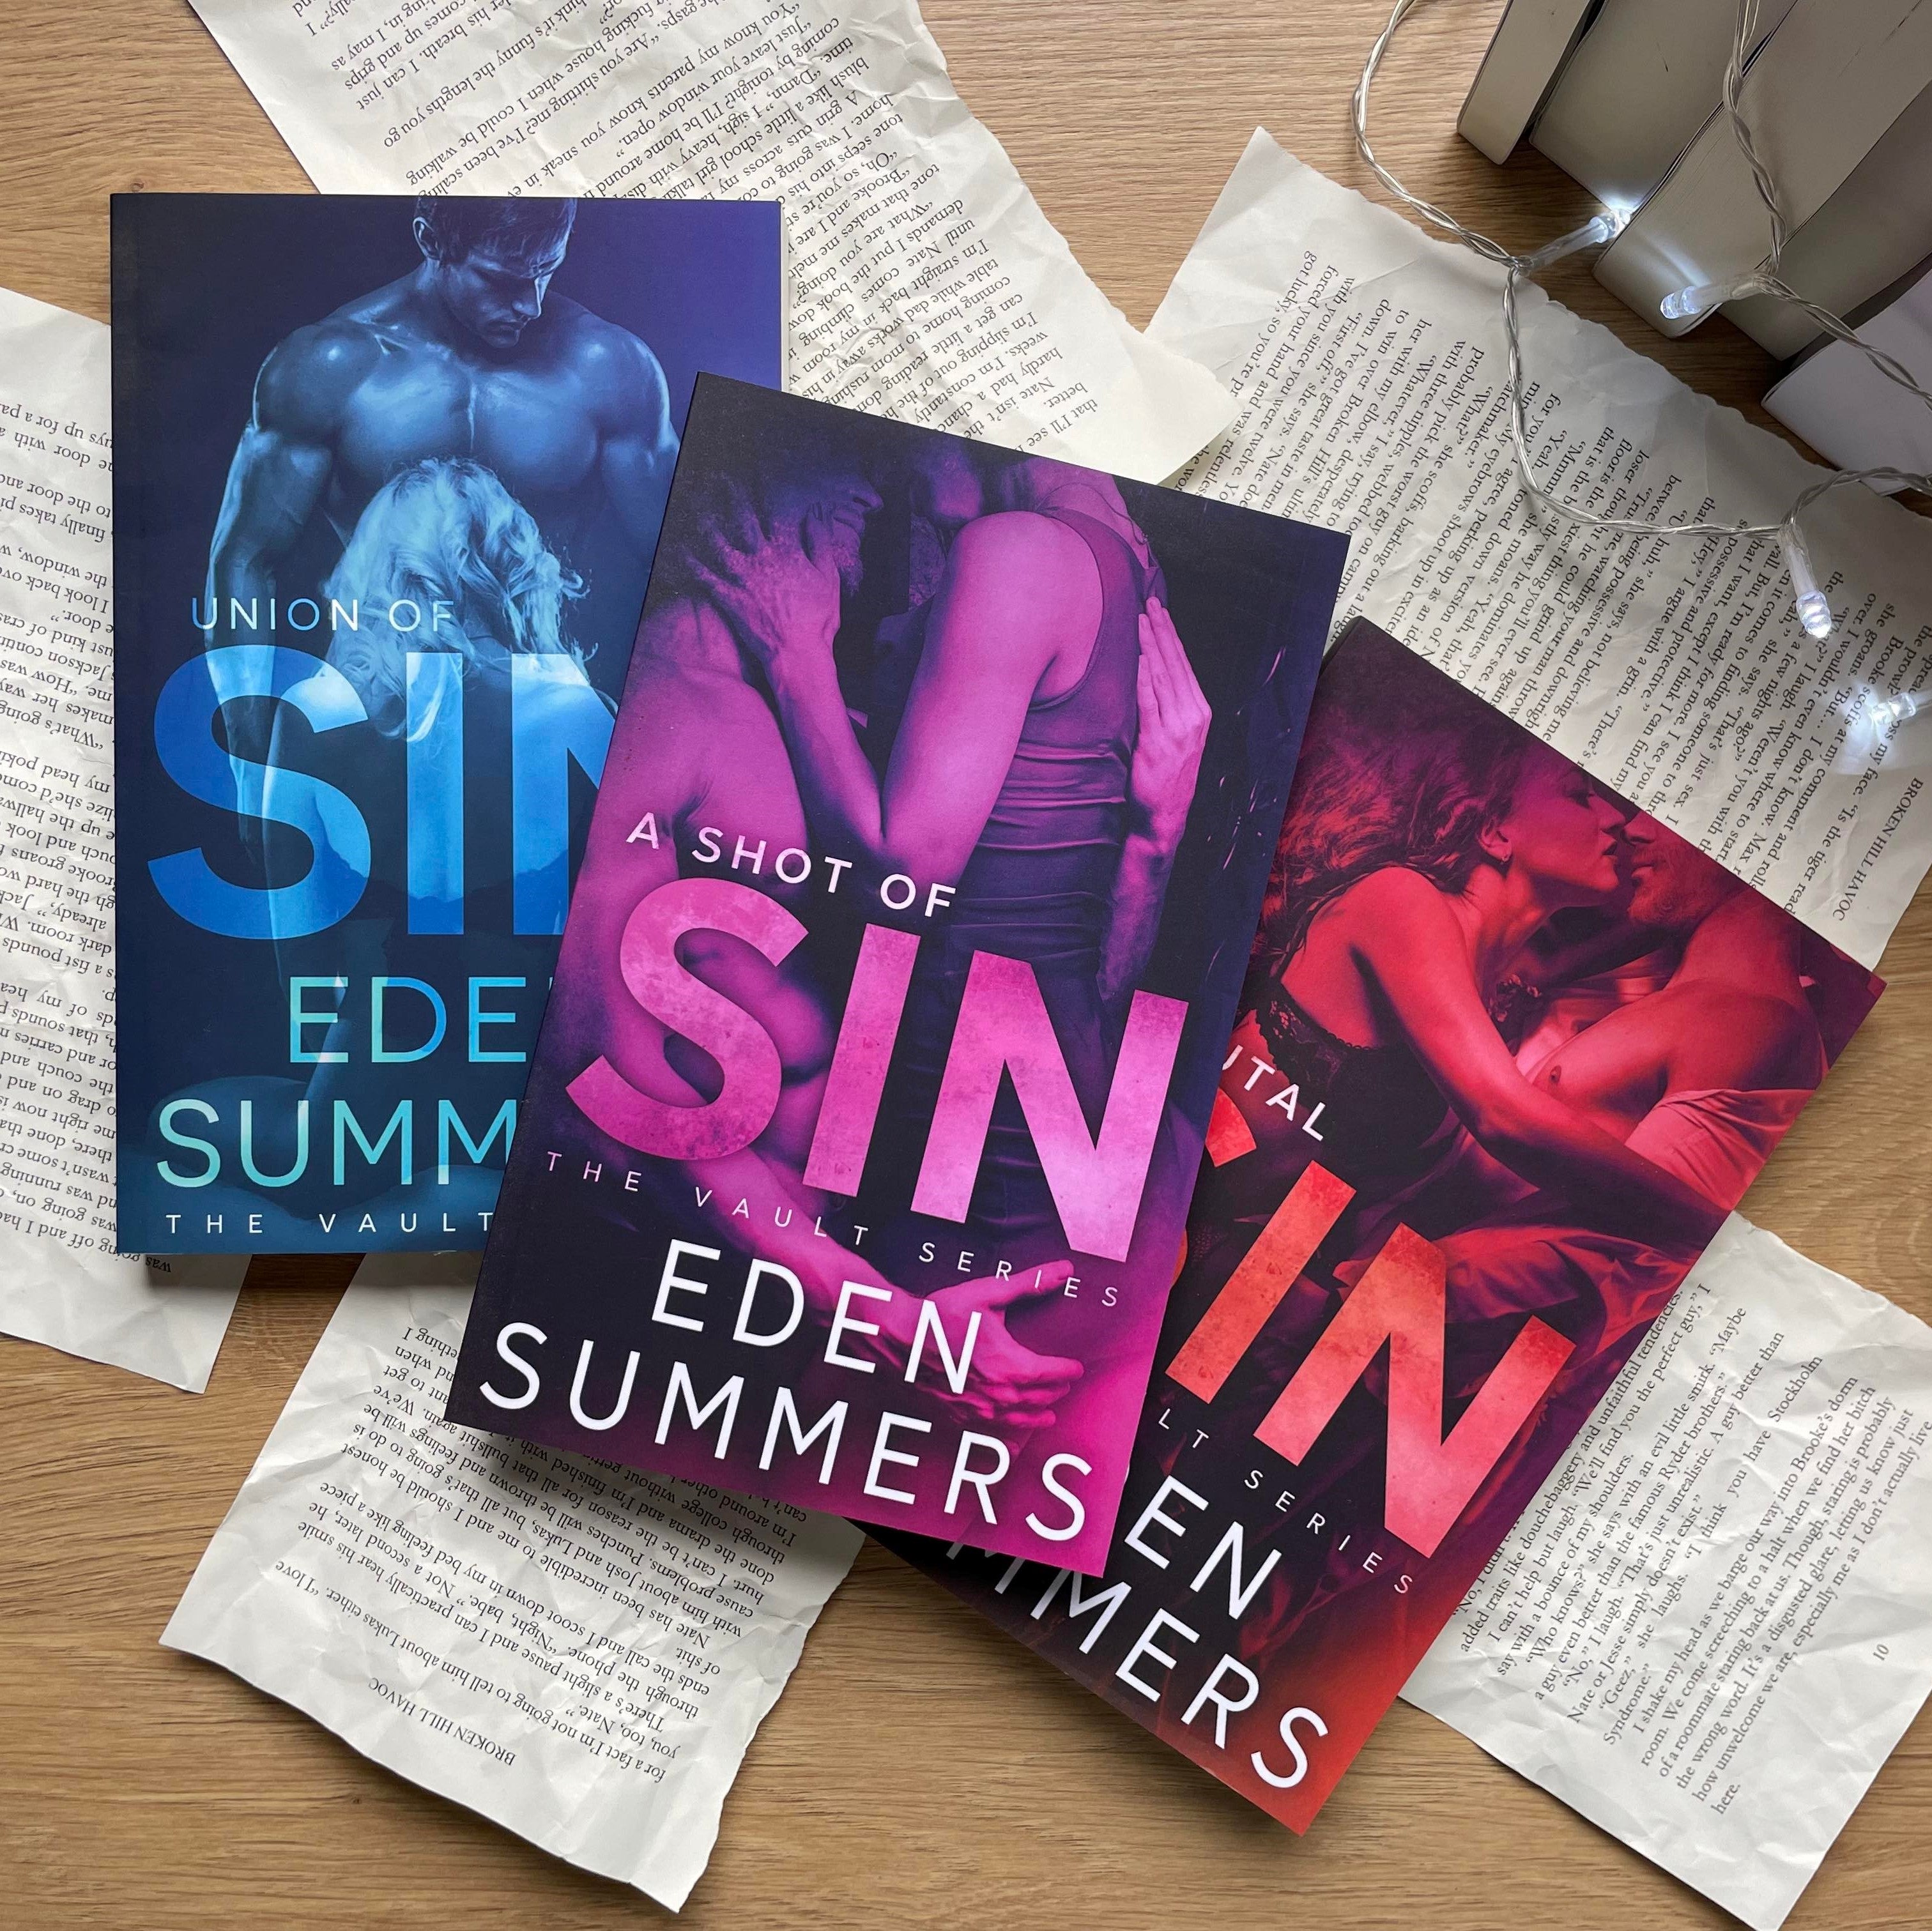 The Vault series by Eden Summers